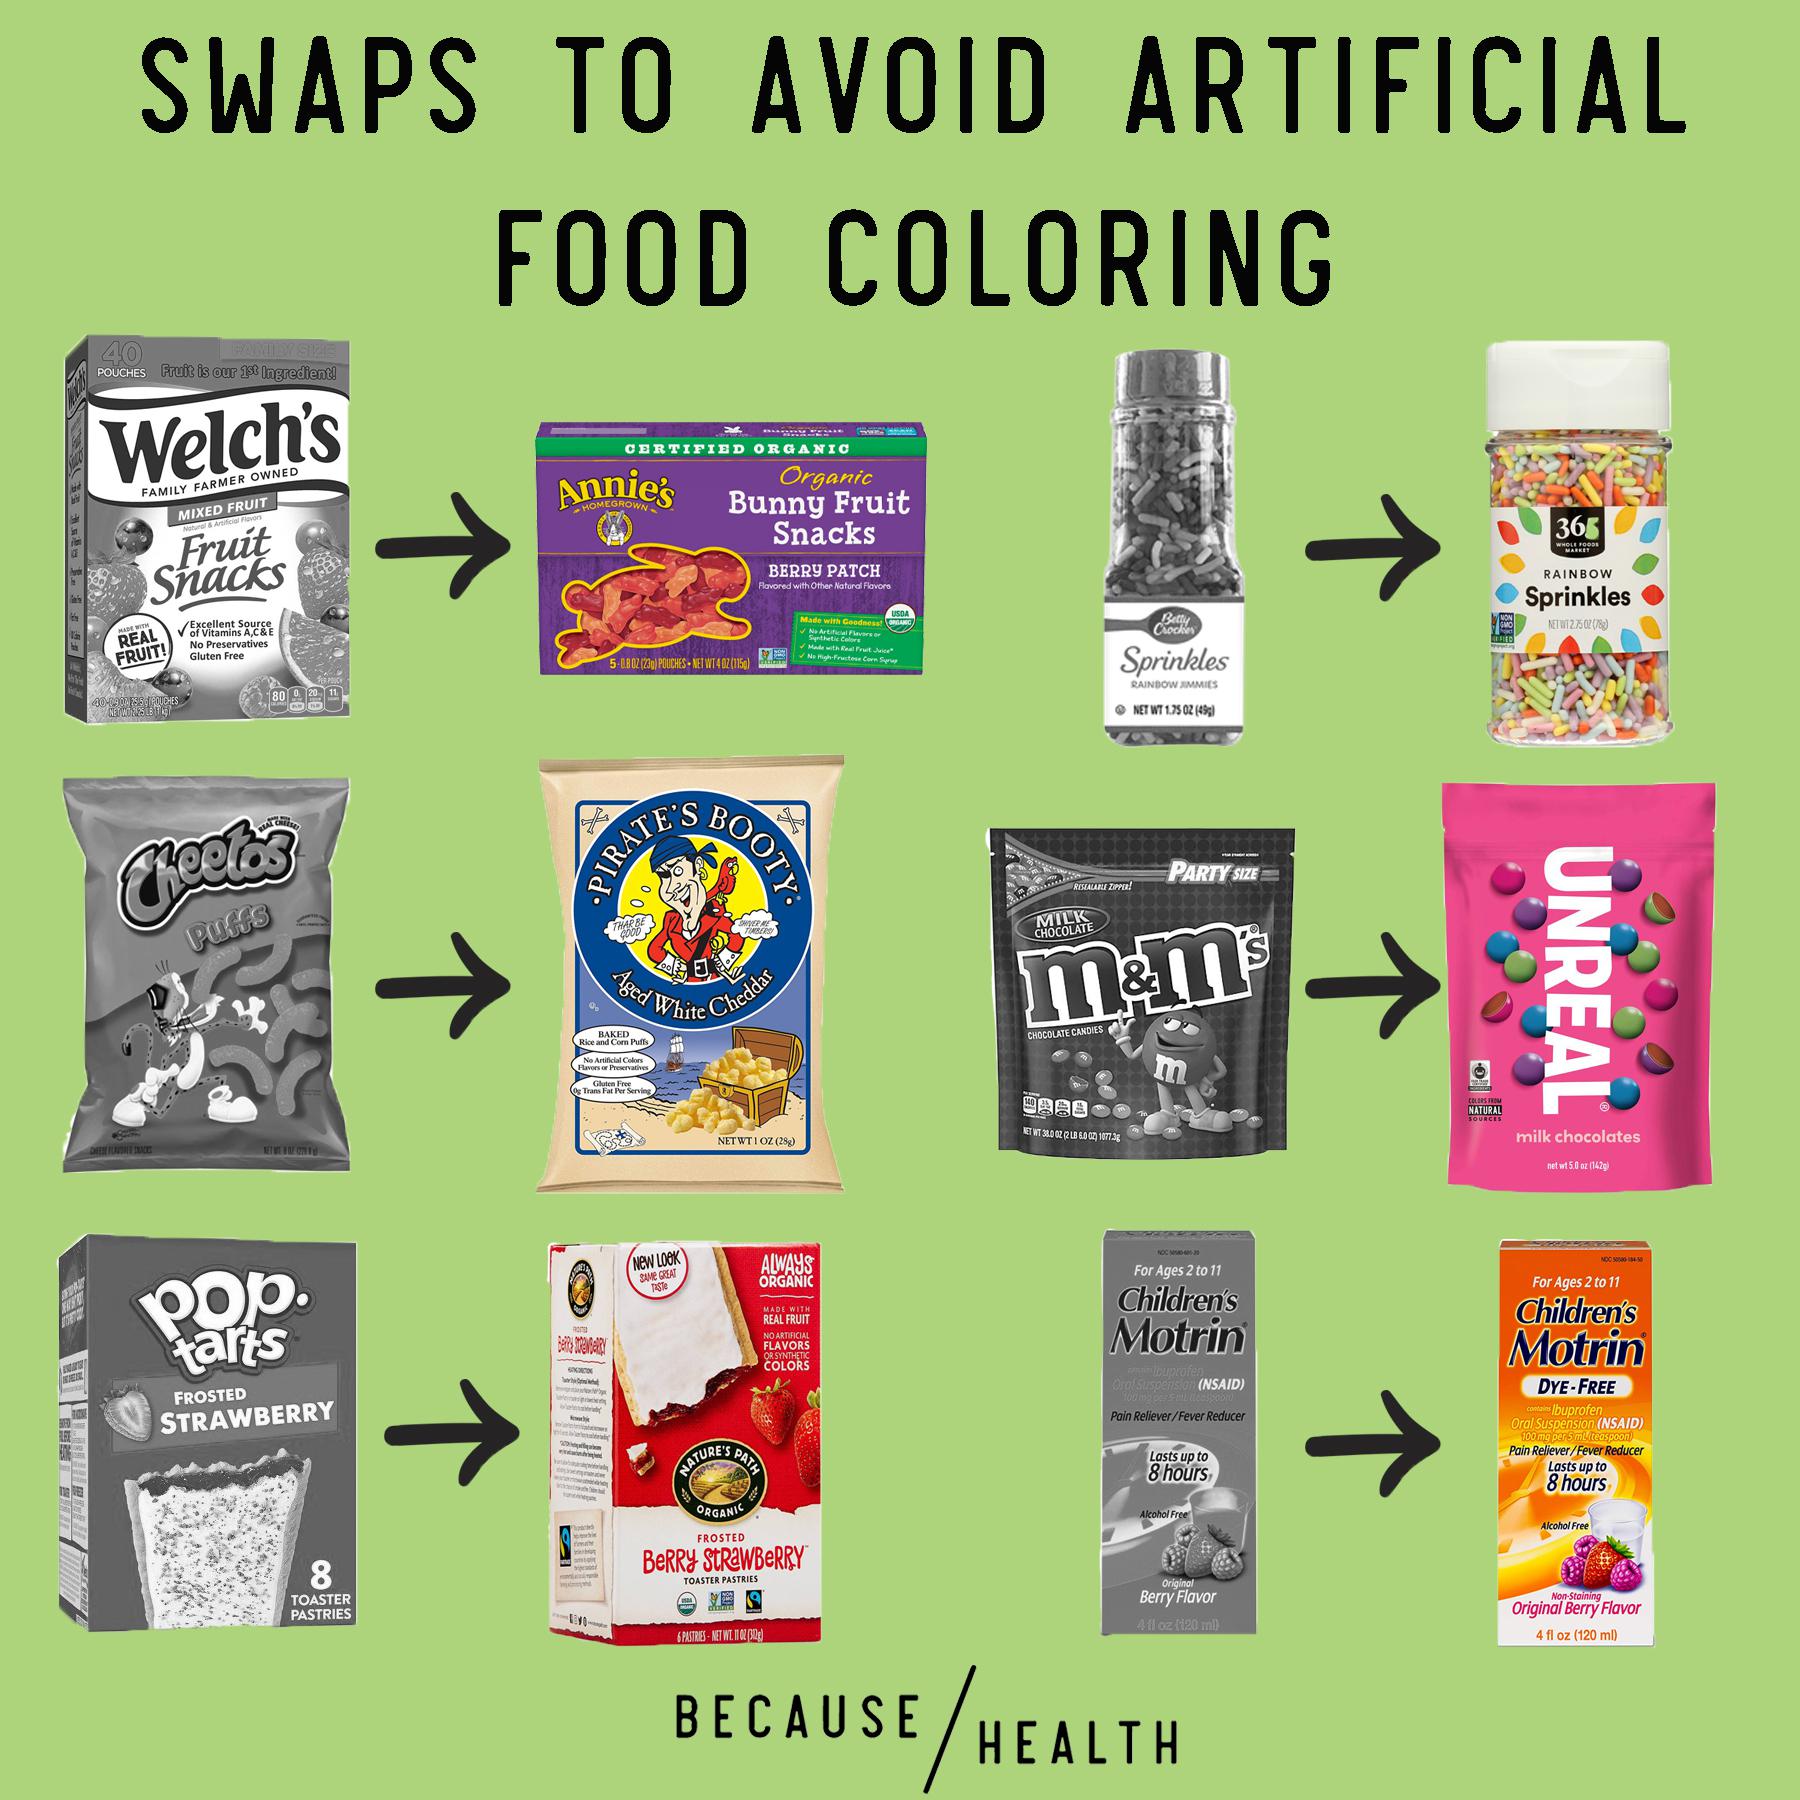 Swaps To Avoid Artificial Food Coloring Center For Environmental Health